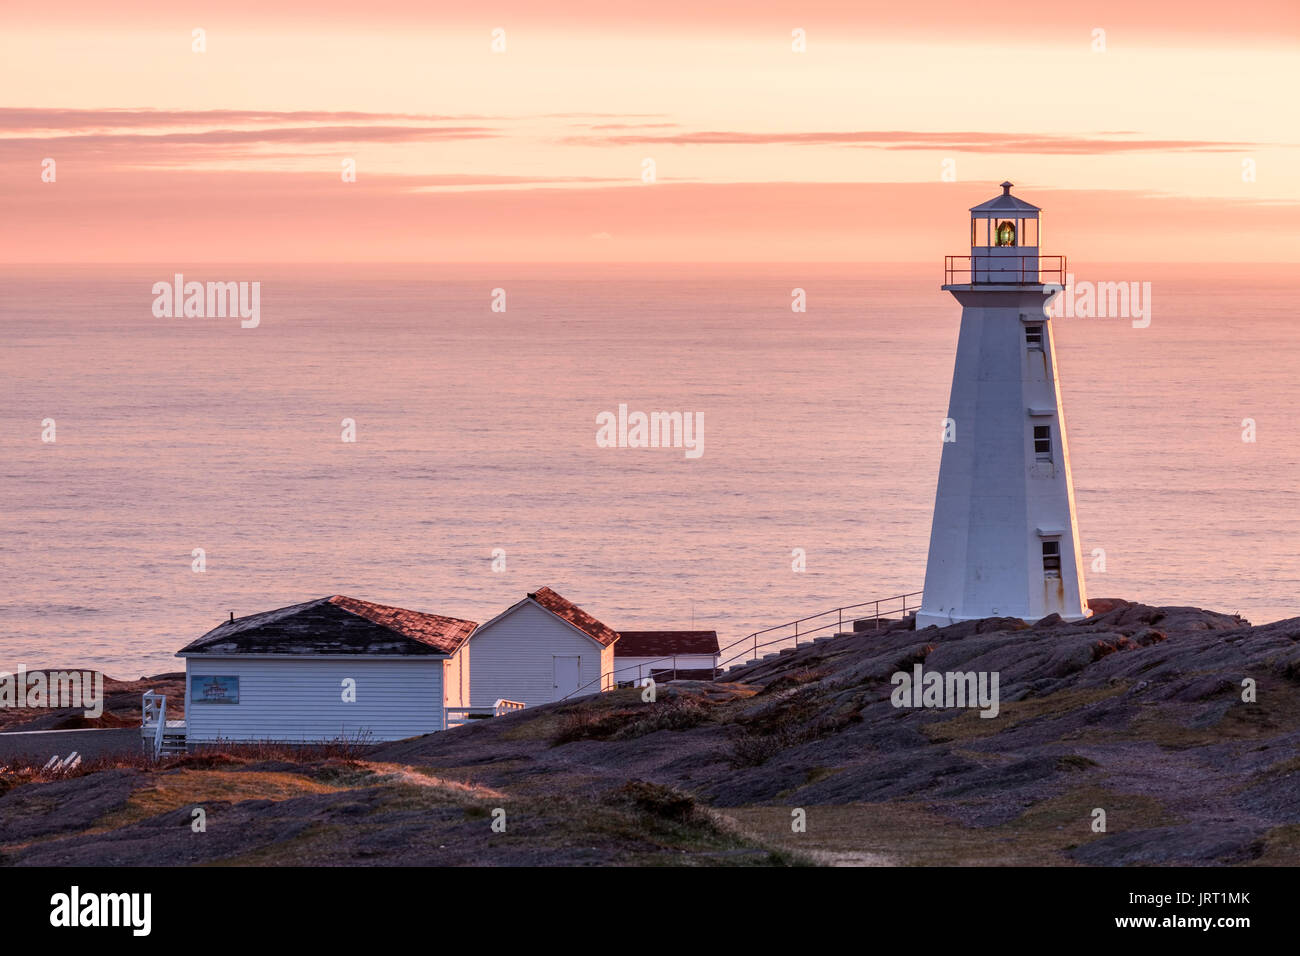 The 1955 concrete Lighthouse at Cape Spear National Historic Site of Canada at sunrise. Cape Spear, St. John's, Newfoundland and Labrador, Canada. Stock Photo